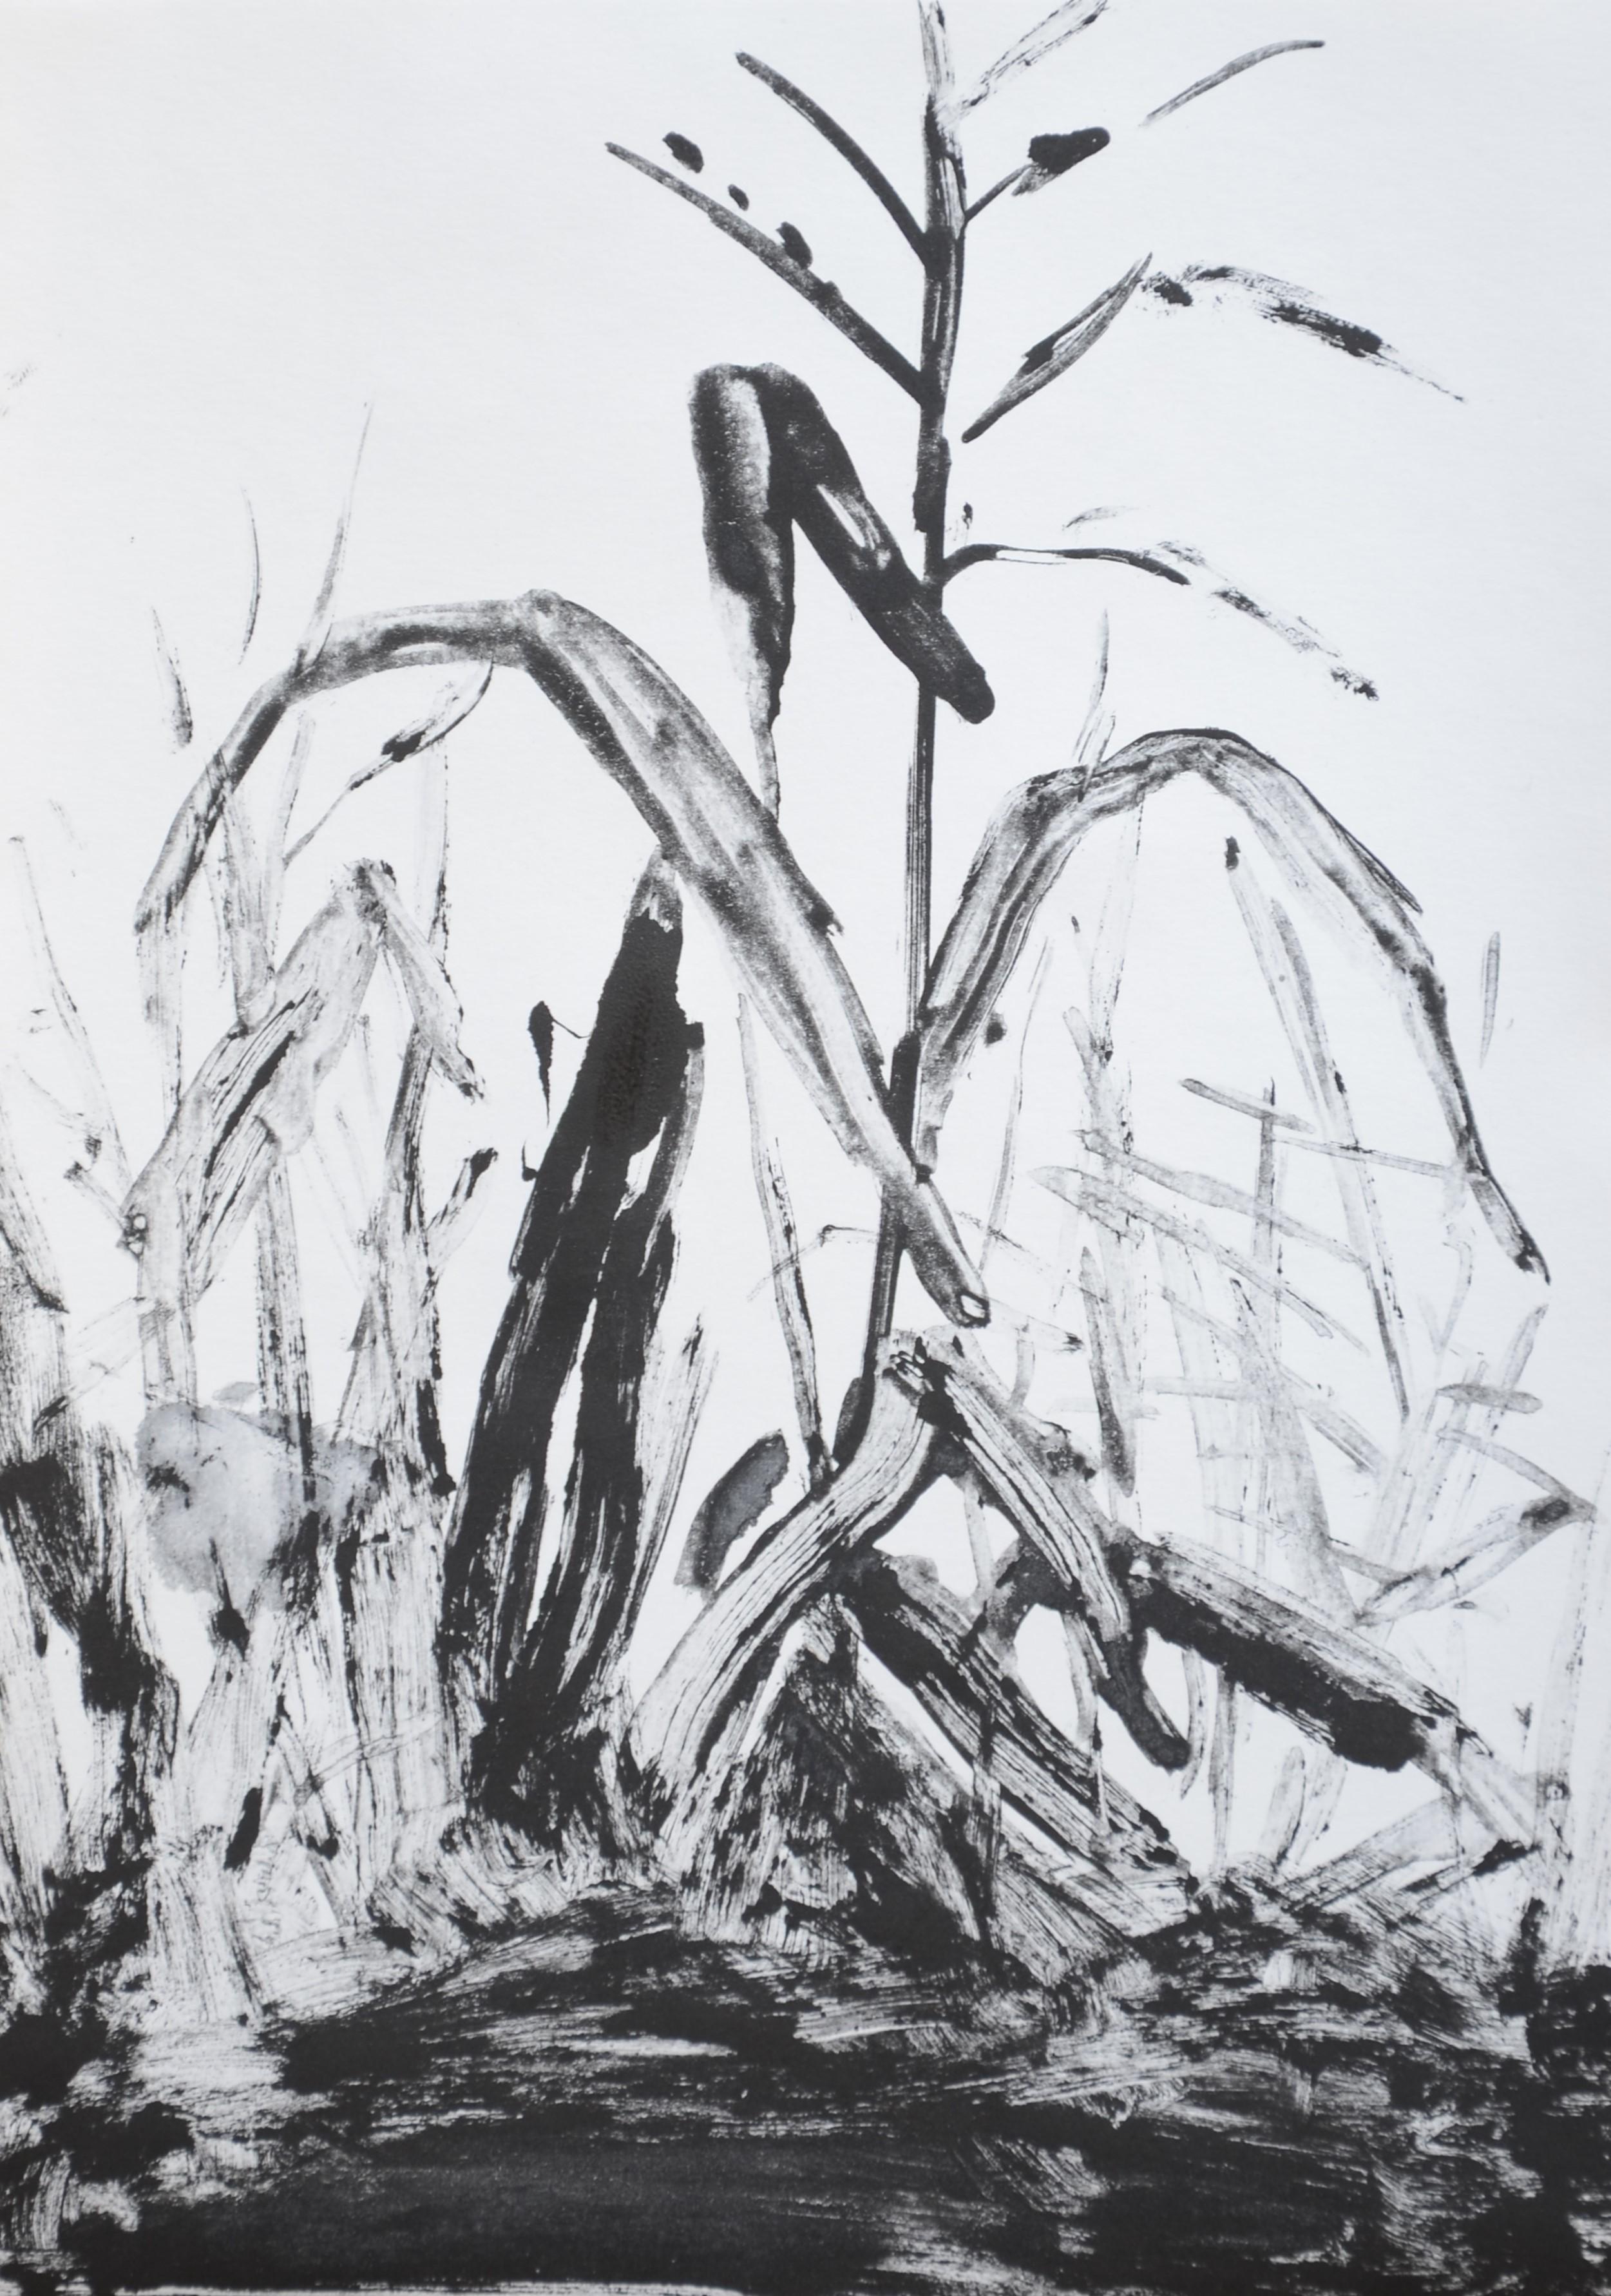 Artist Jasper Hagenaar made unique monotypes. The monoprints are works in black acrylic paint pressed on paper (21 x 29,5 cm) based upon previous paintings. This a a work of a plant, with some very nice details. Signed on the back.

Over the last